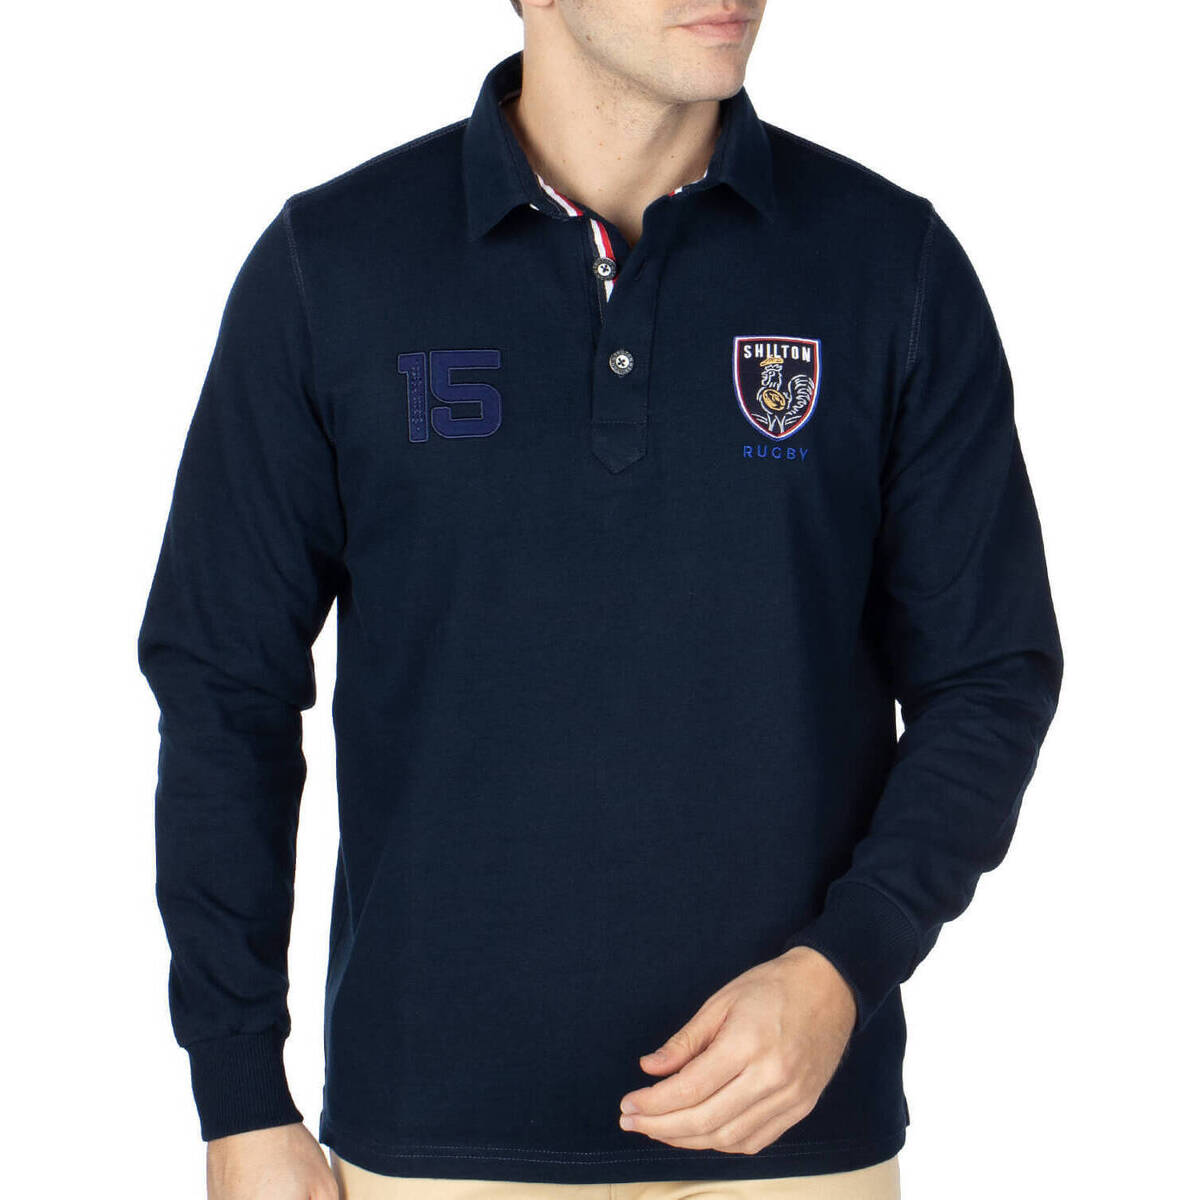 Vêtements Homme Infradito smocked POLO RALPH LAUREN Camino II RF103439 Navy Red smocked Polo rugby XV 